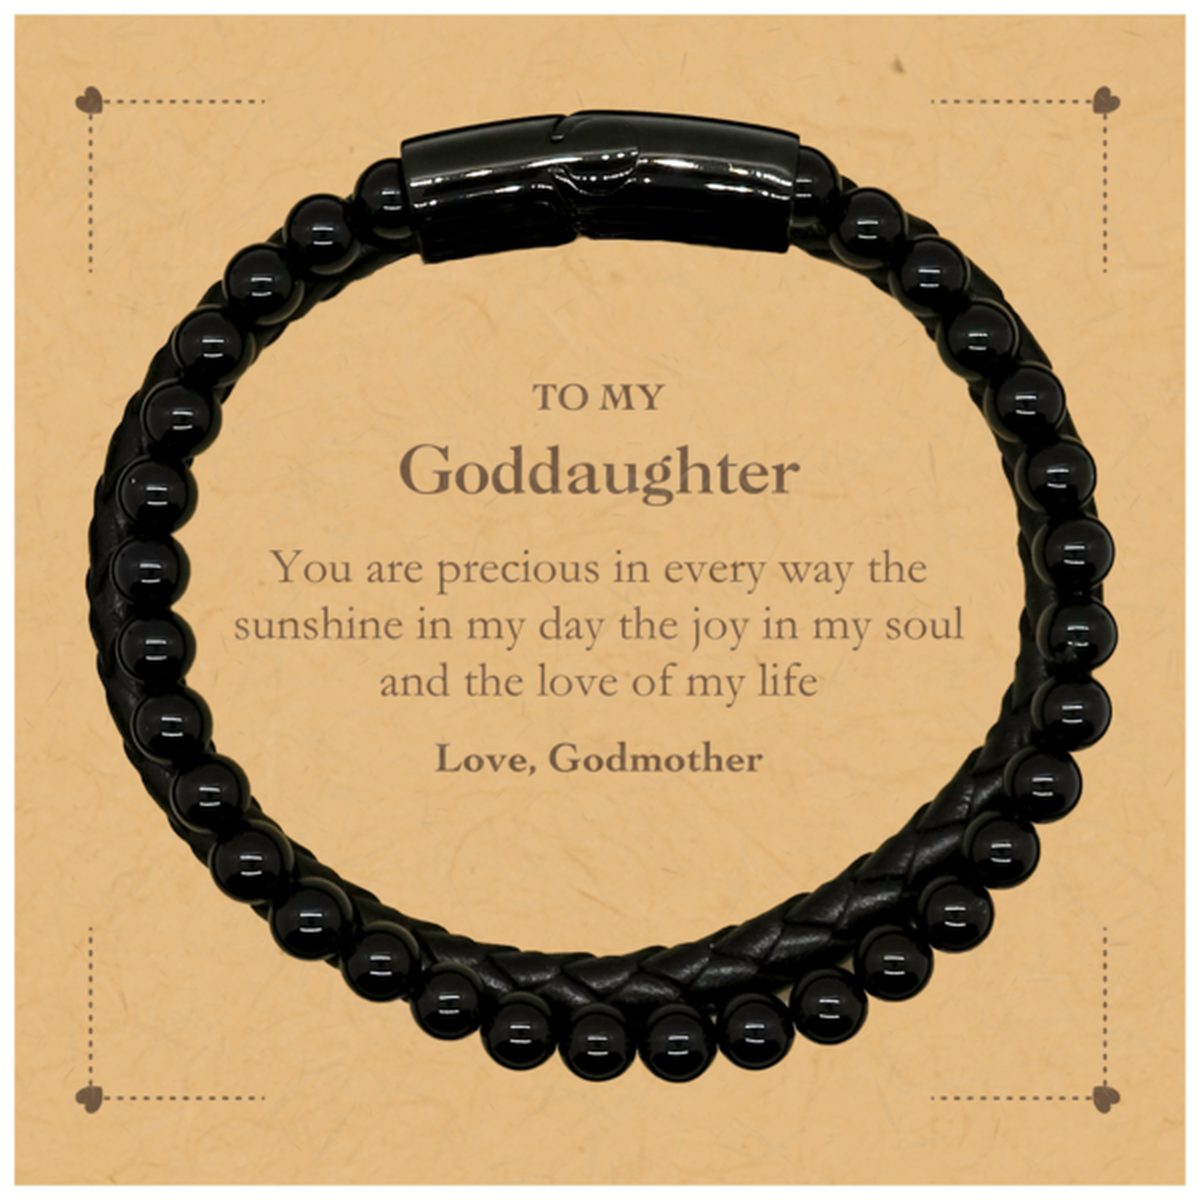 Graduation Gifts for Goddaughter Stone Leather Bracelets Present from Godmother, Christmas Goddaughter Birthday Gifts Goddaughter You are precious in every way the sunshine in my day. Love, Godmother